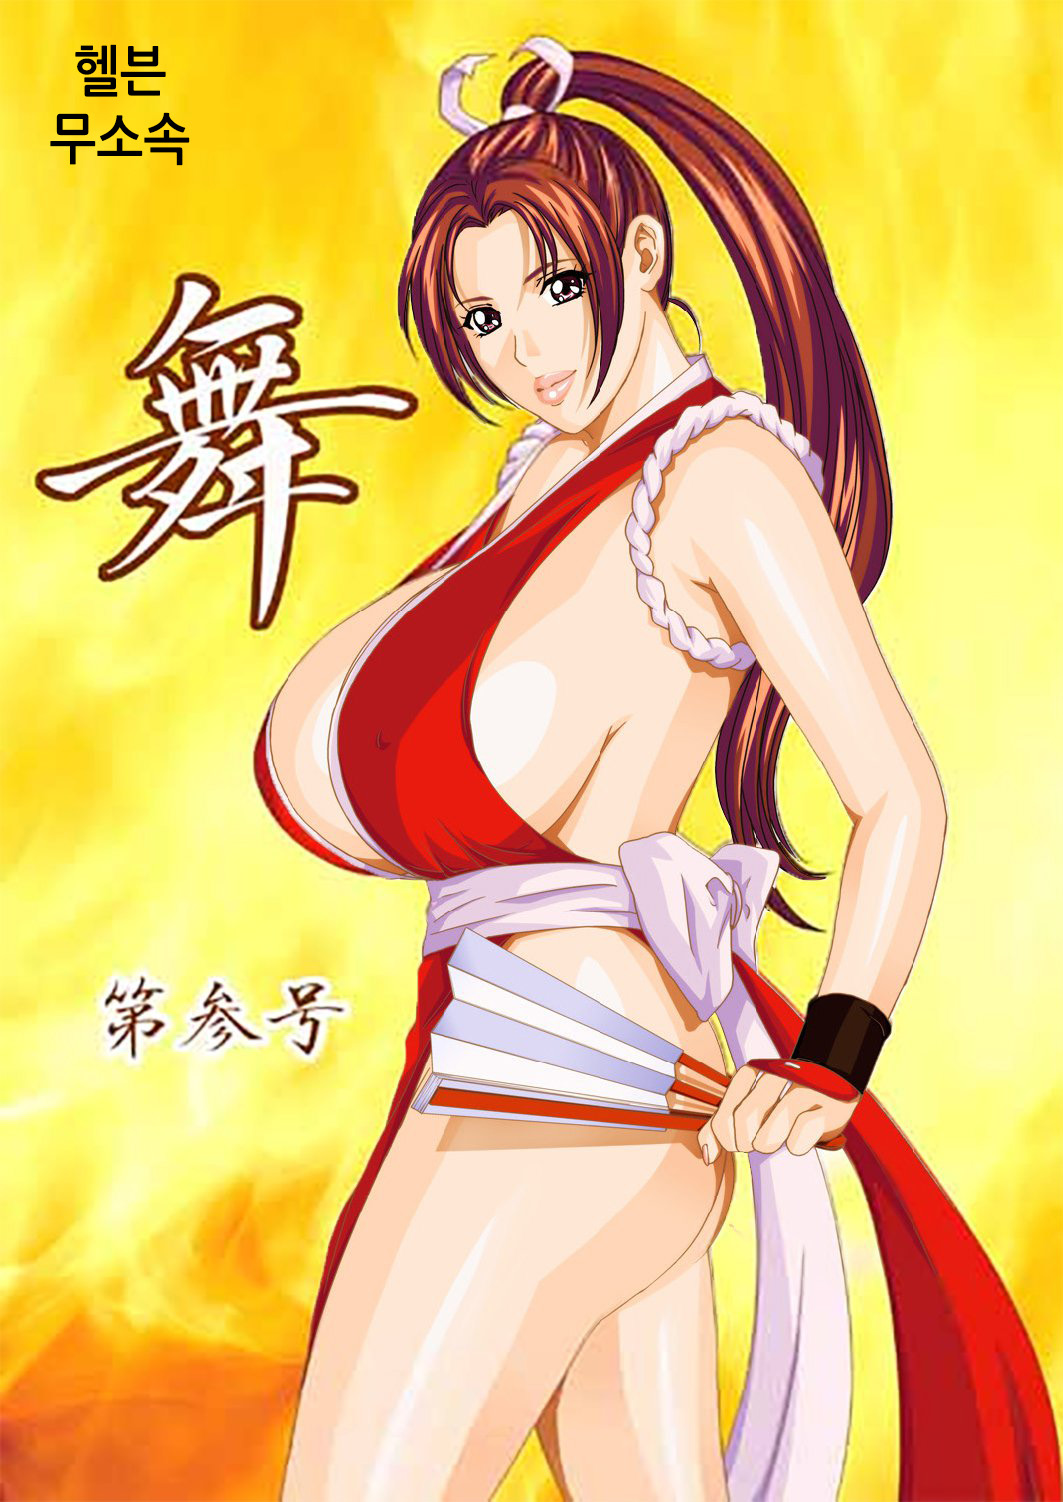 [D-LOVERS (Nishimaki Tohru)] Mai -Innyuuden- Daisangou (Busty Game Gals Collection vol.01) (King of Fighters) [Korean] [Digital] [D-LOVERS (にしまきとおる)] 舞 -淫乳伝- 第参号 (Busty Game Gals Collection vol.01) (キング·オブ·ファイターズ) [韓国翻訳] [DL版]